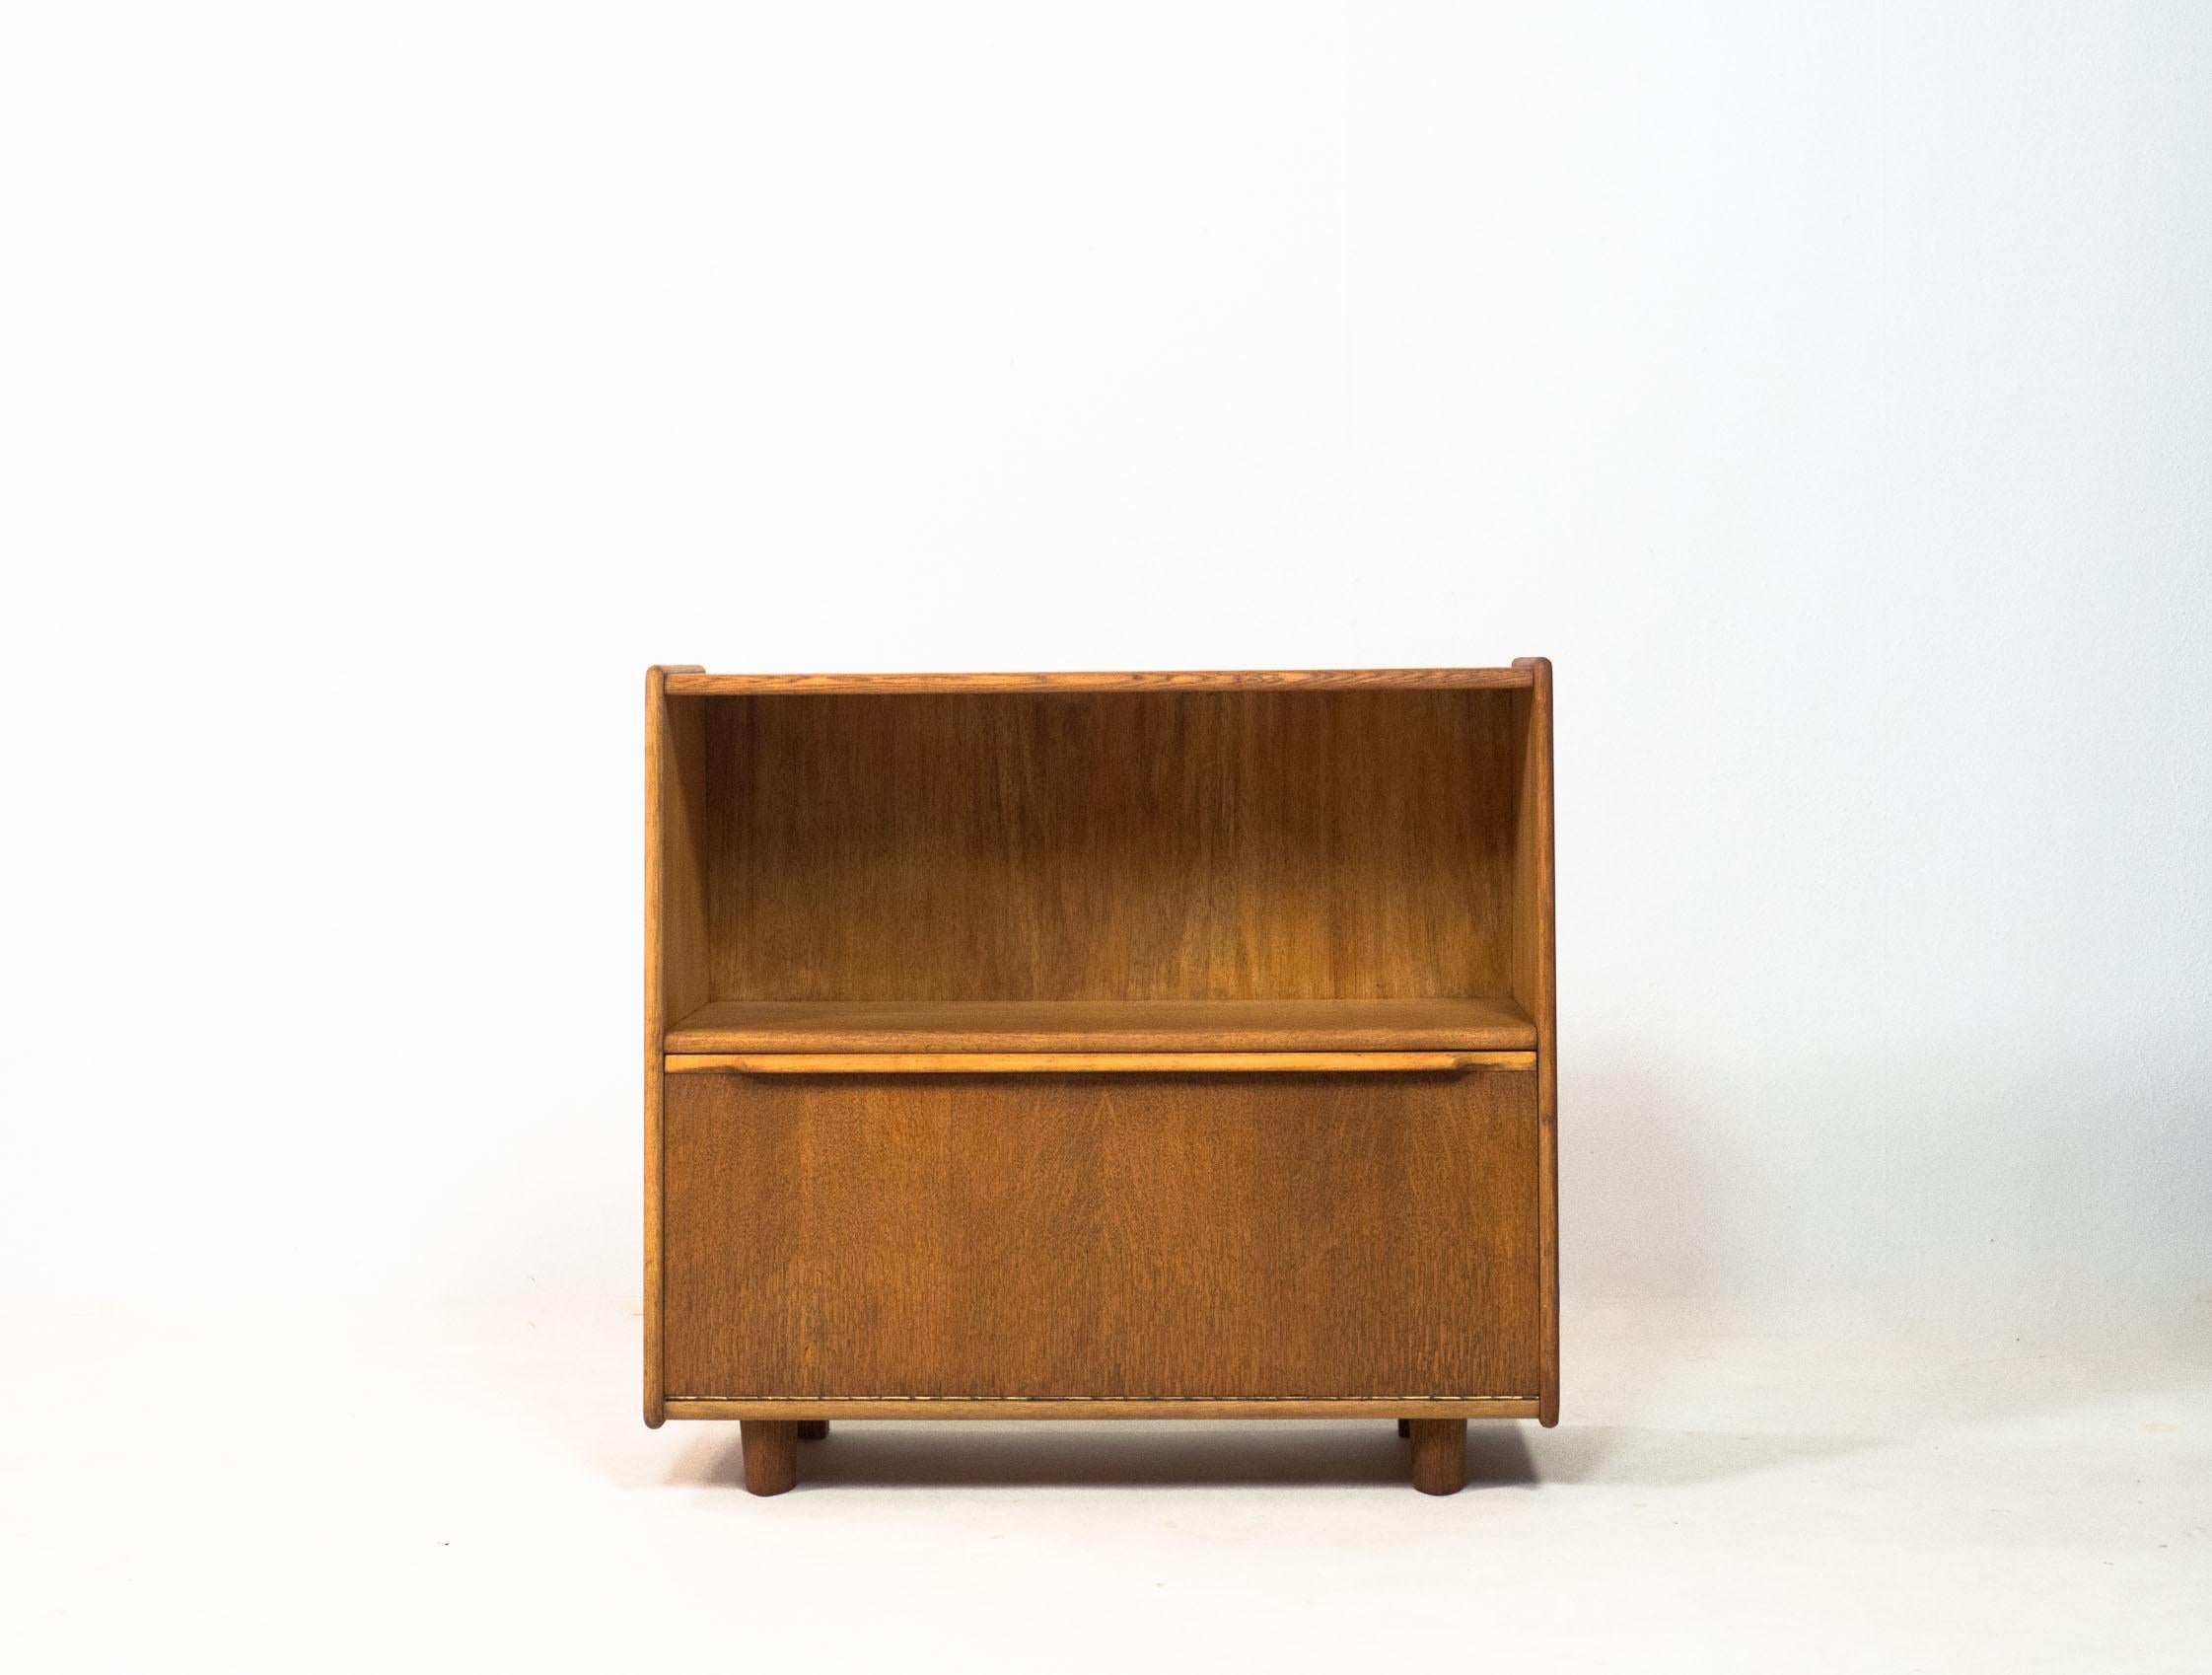 Oak series book cabinet model ‘BE05’ designed by Cees Braakman for UMS Pastoe in the 1950s.

This cabinet is veneered in oak and has thick solid oak edges and feet. The door handle is made of solid beech and the insides are veneered with